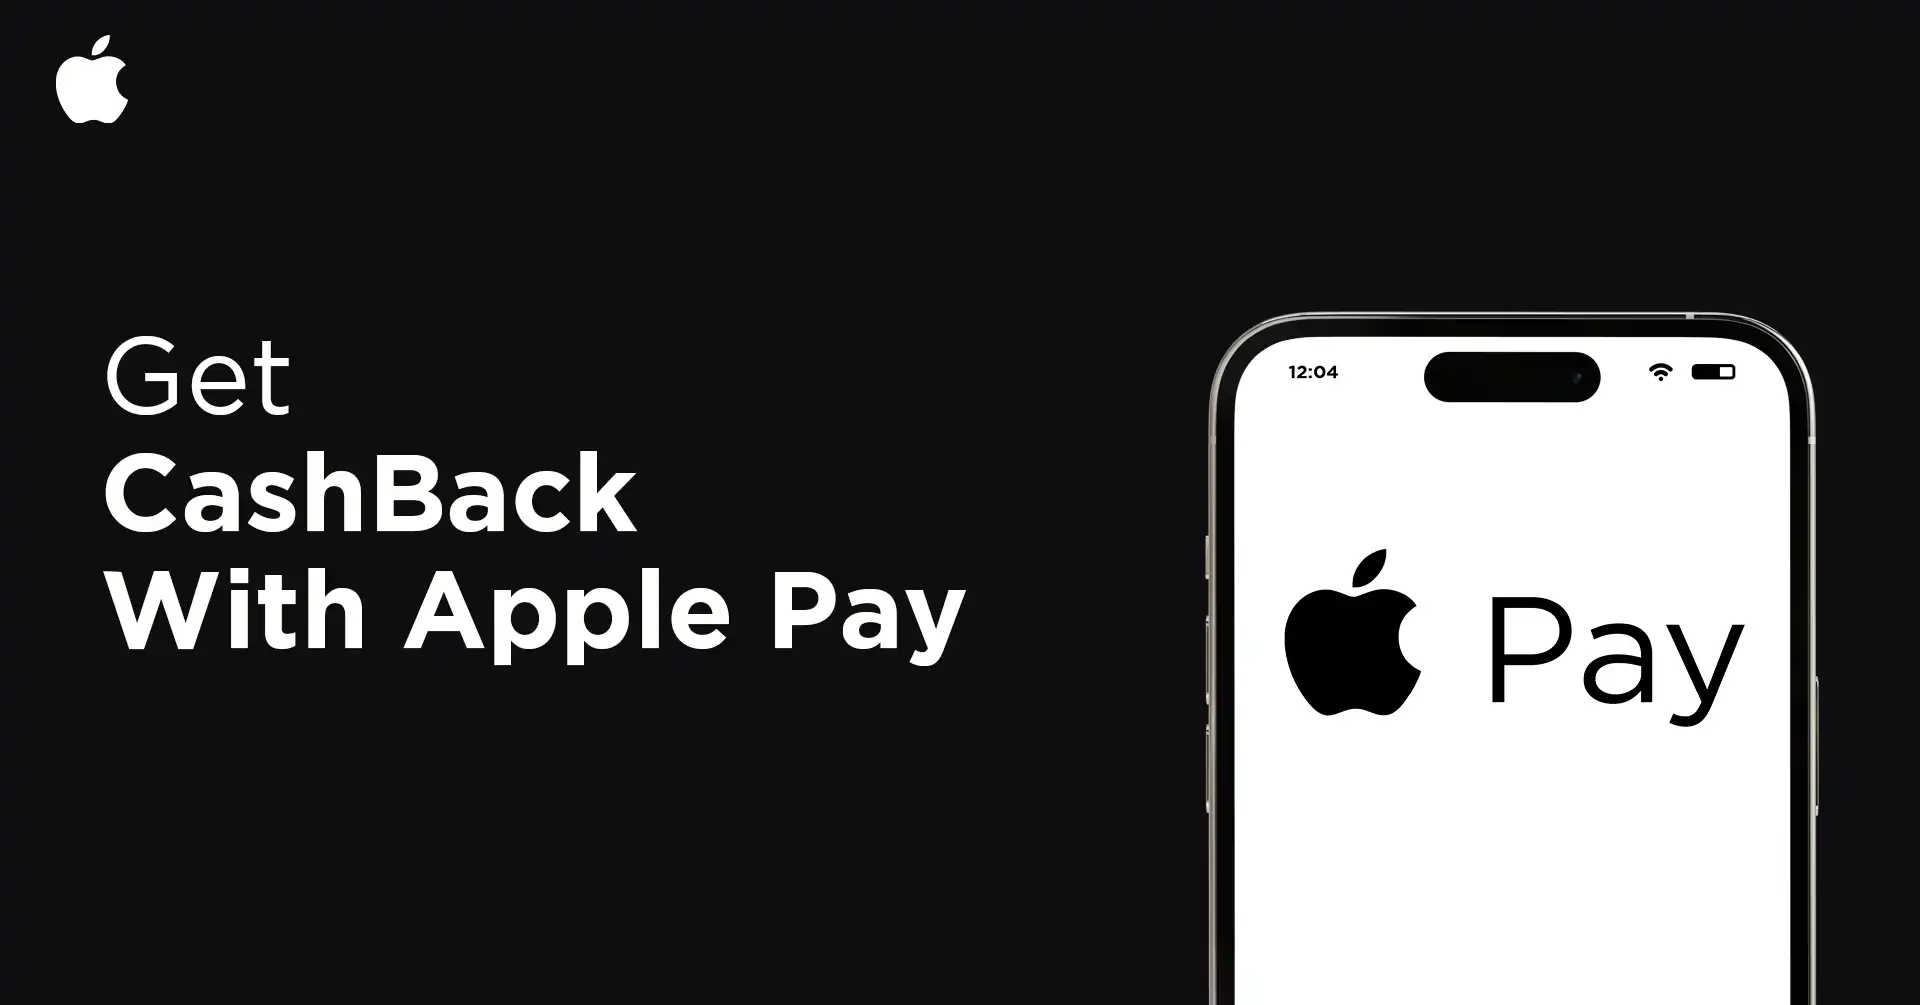 Get CashBack With Apple Pay